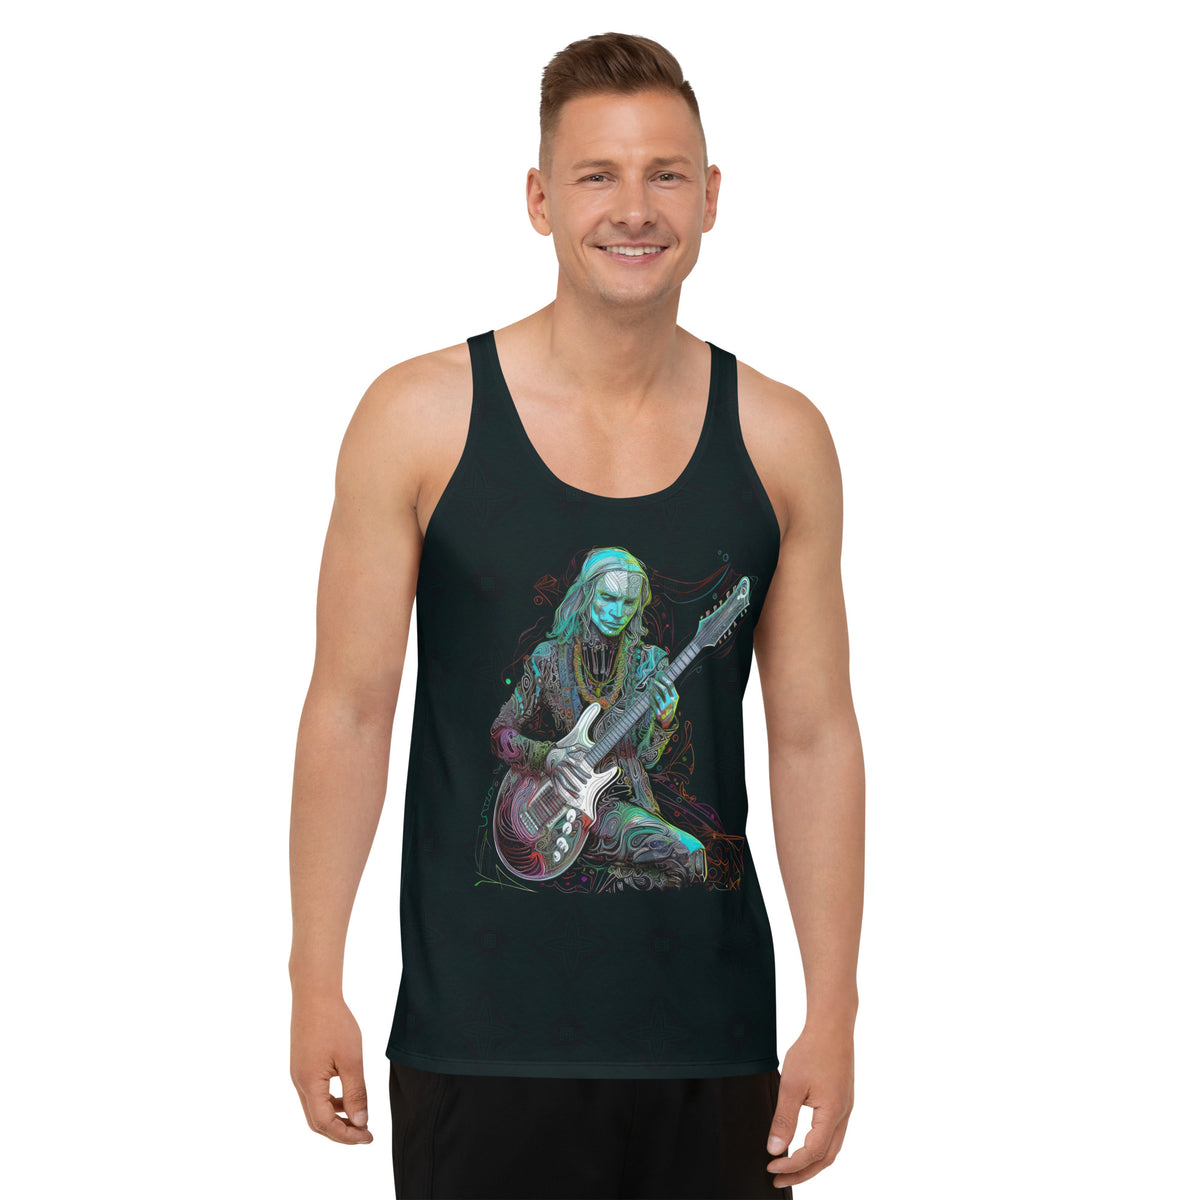 Front view of the Daisy Delight Men's Tank Top.